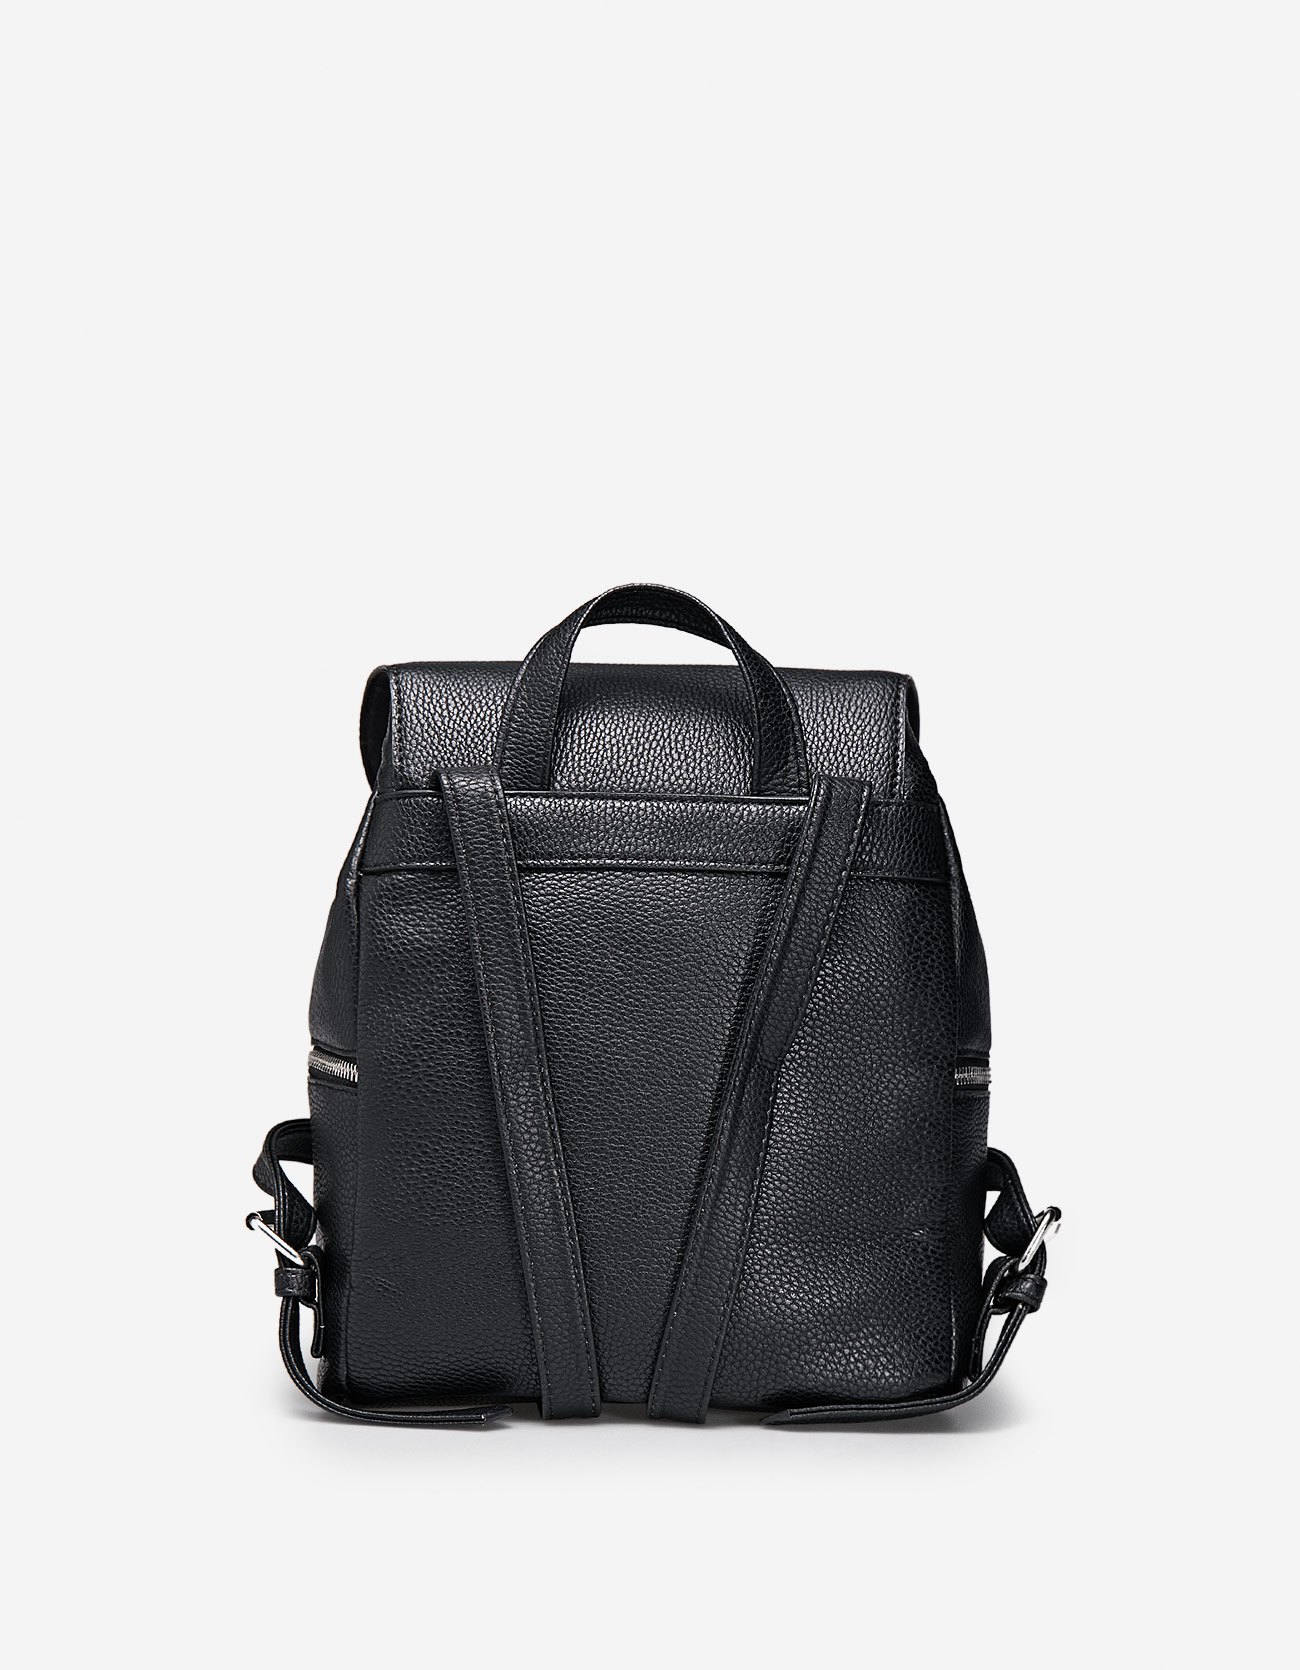 Stradivarius Mini Backpack With Flap In Black at £17.99 | love the brands